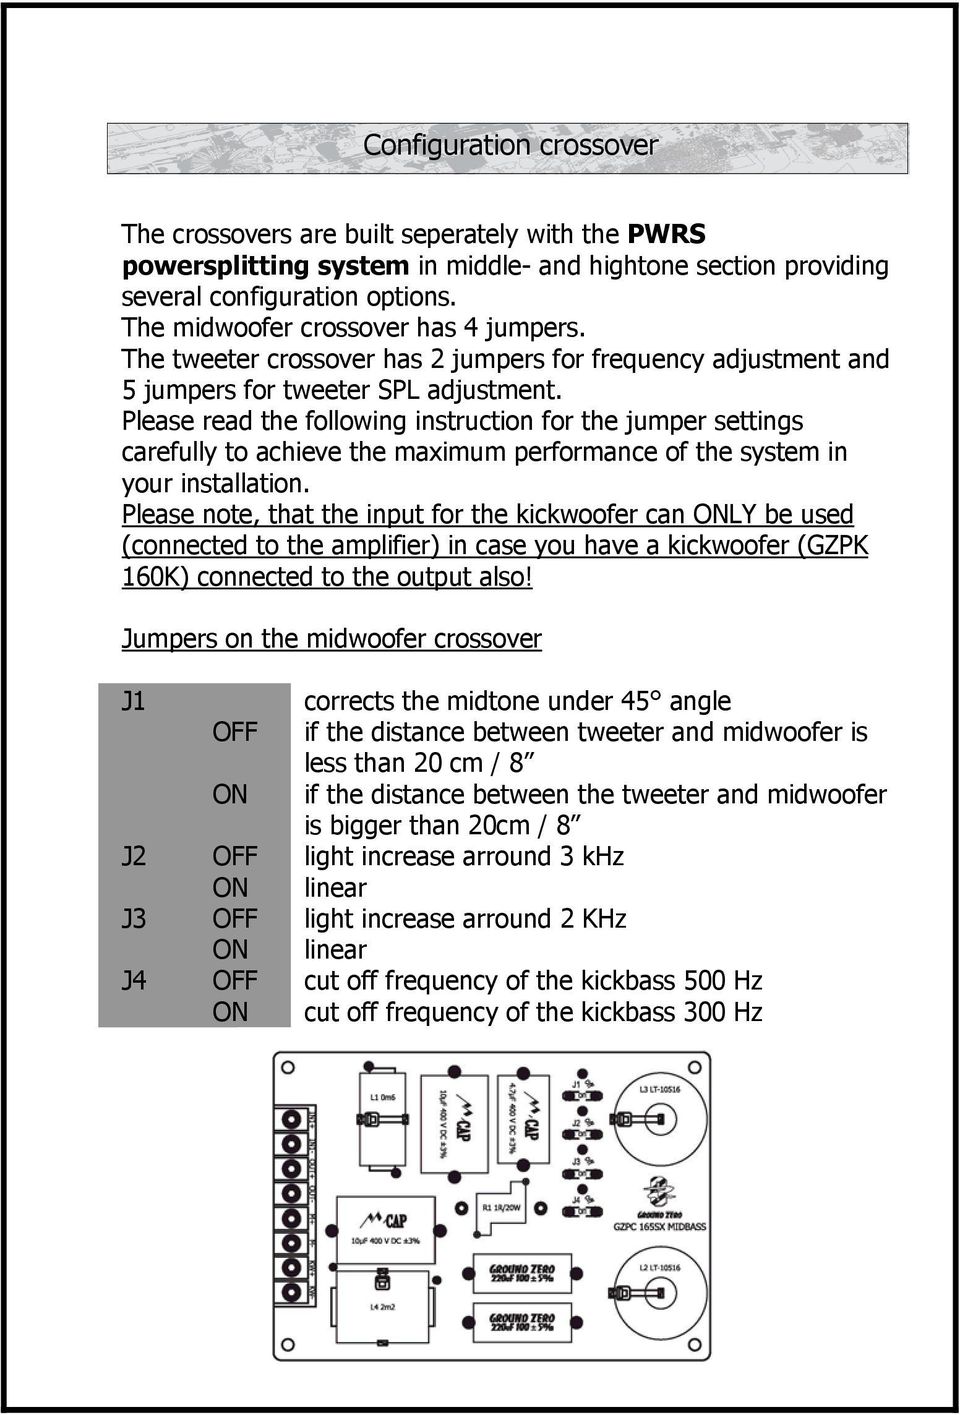 Please read the following instruction for the jumper settings carefully to achieve the maximum performance of the system in your installation.